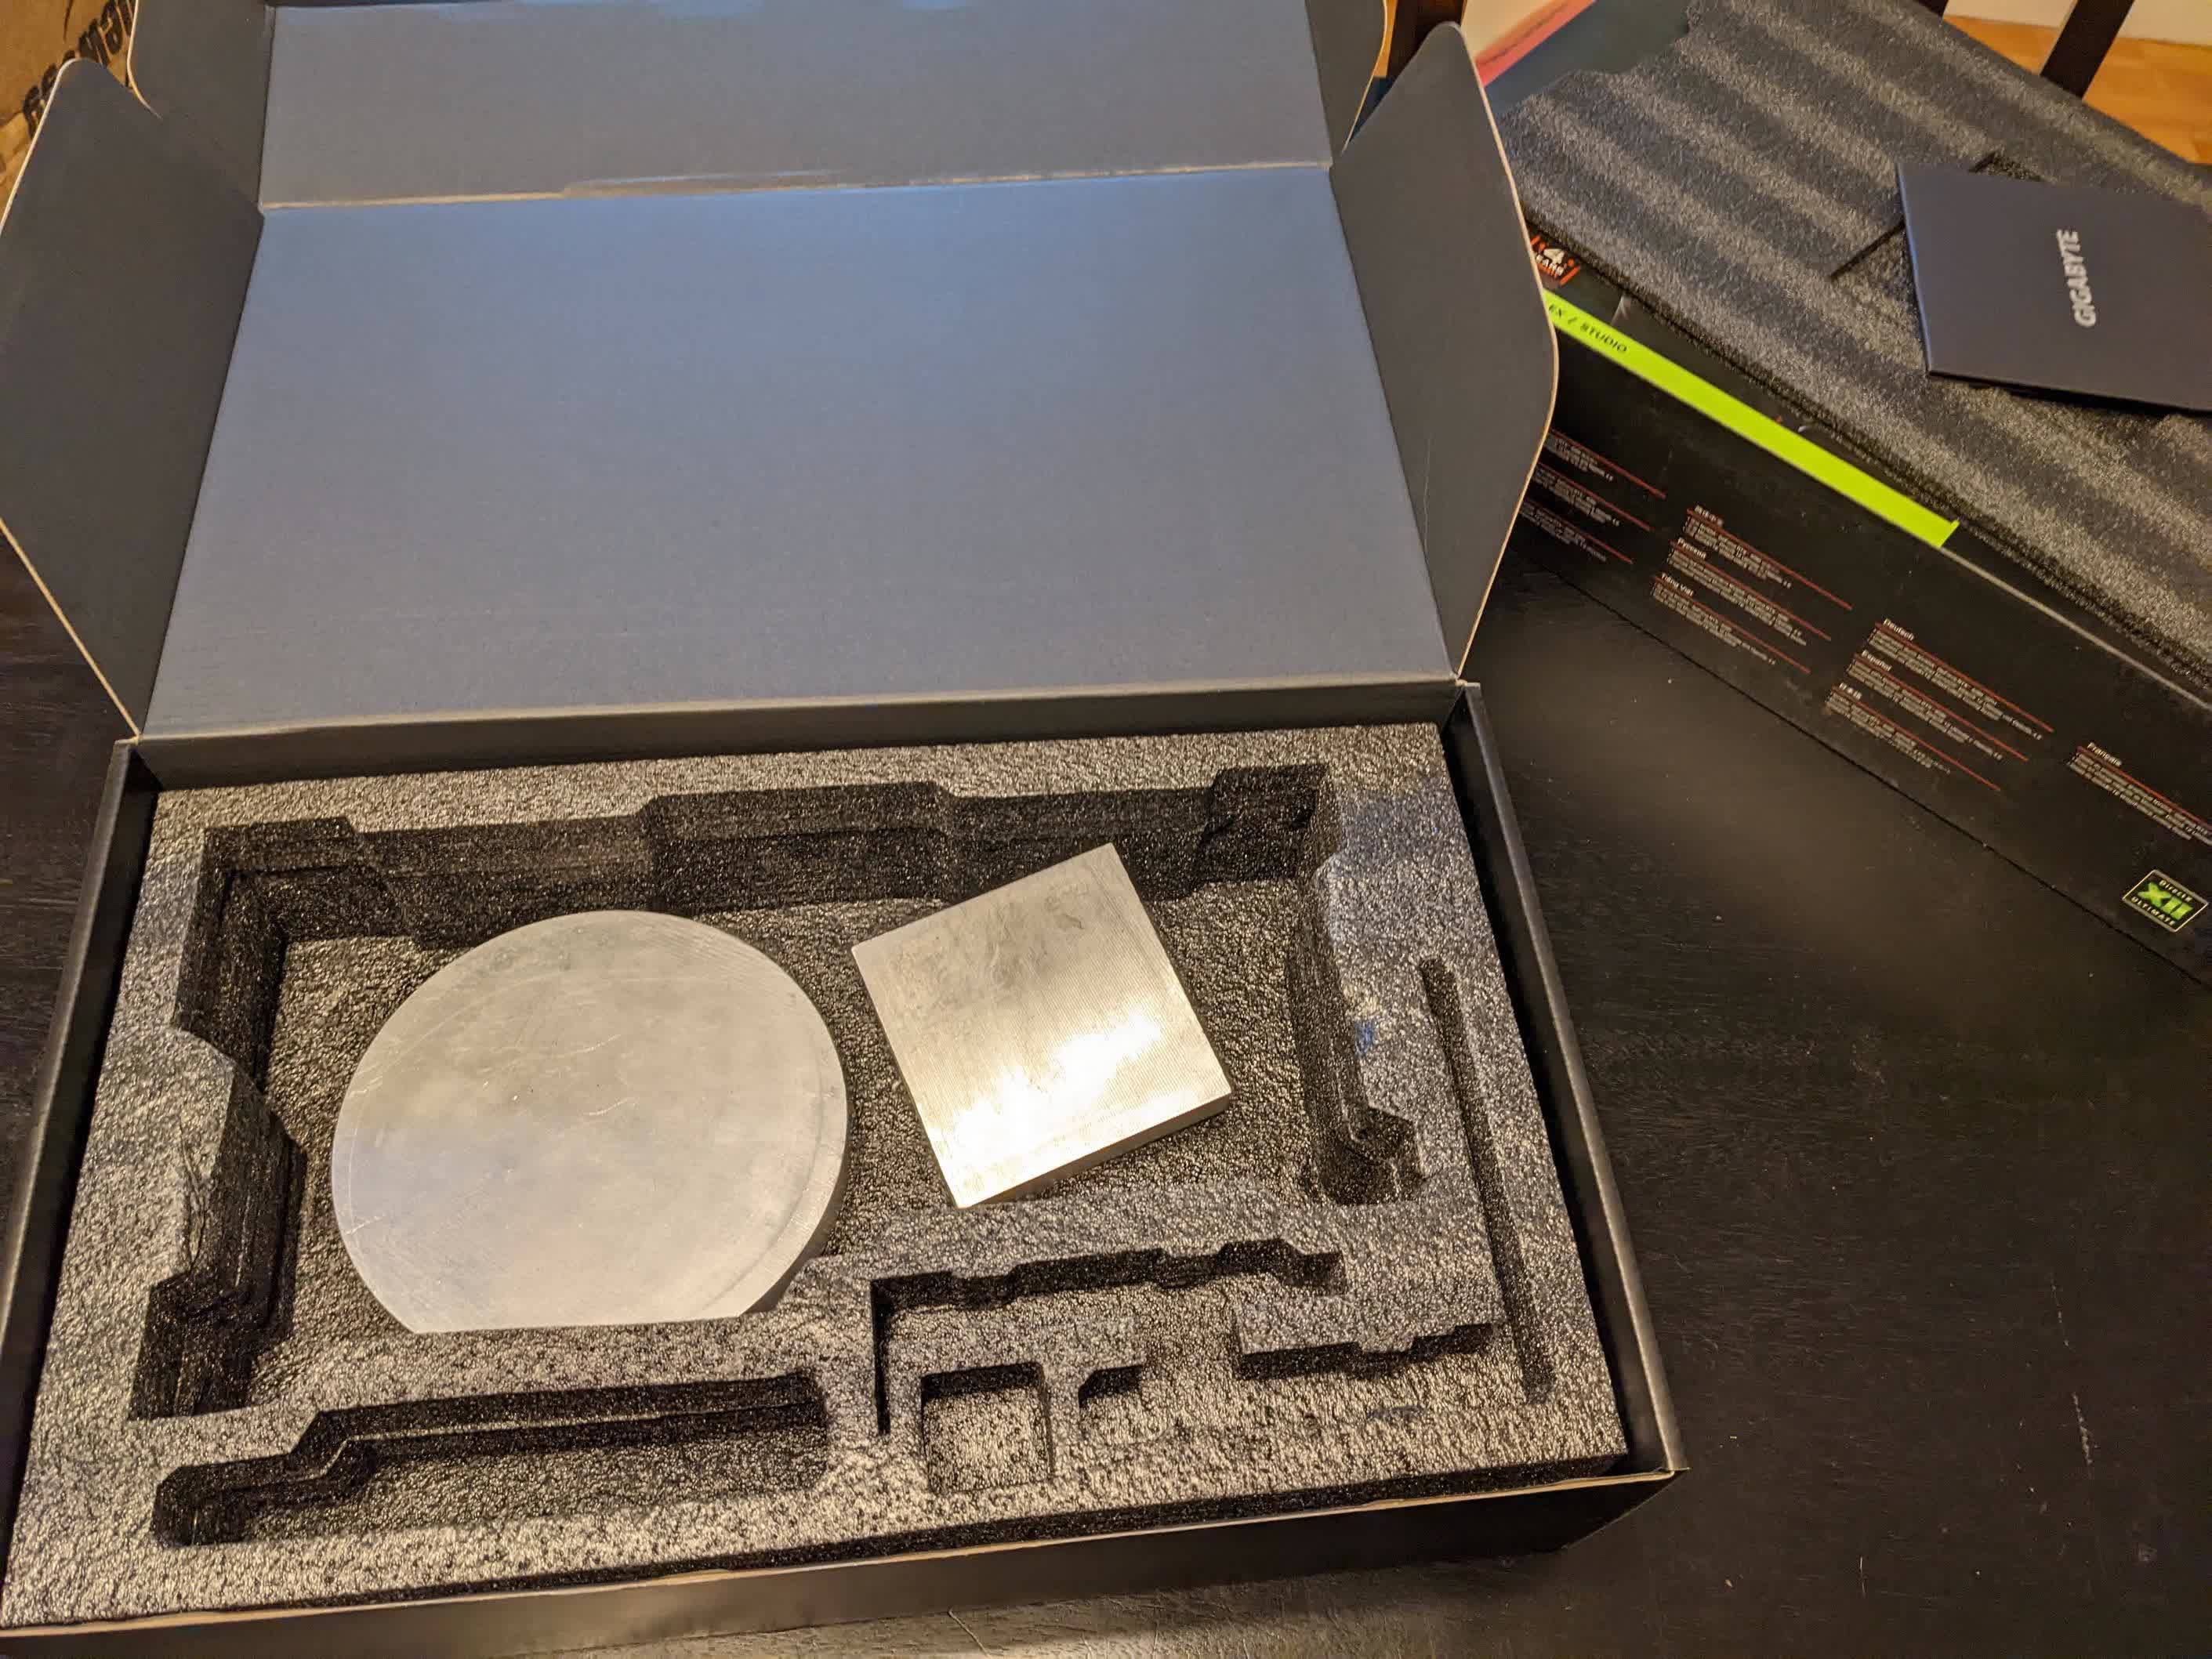 Newegg refunds customer who received RTX 4090 box filled with weights